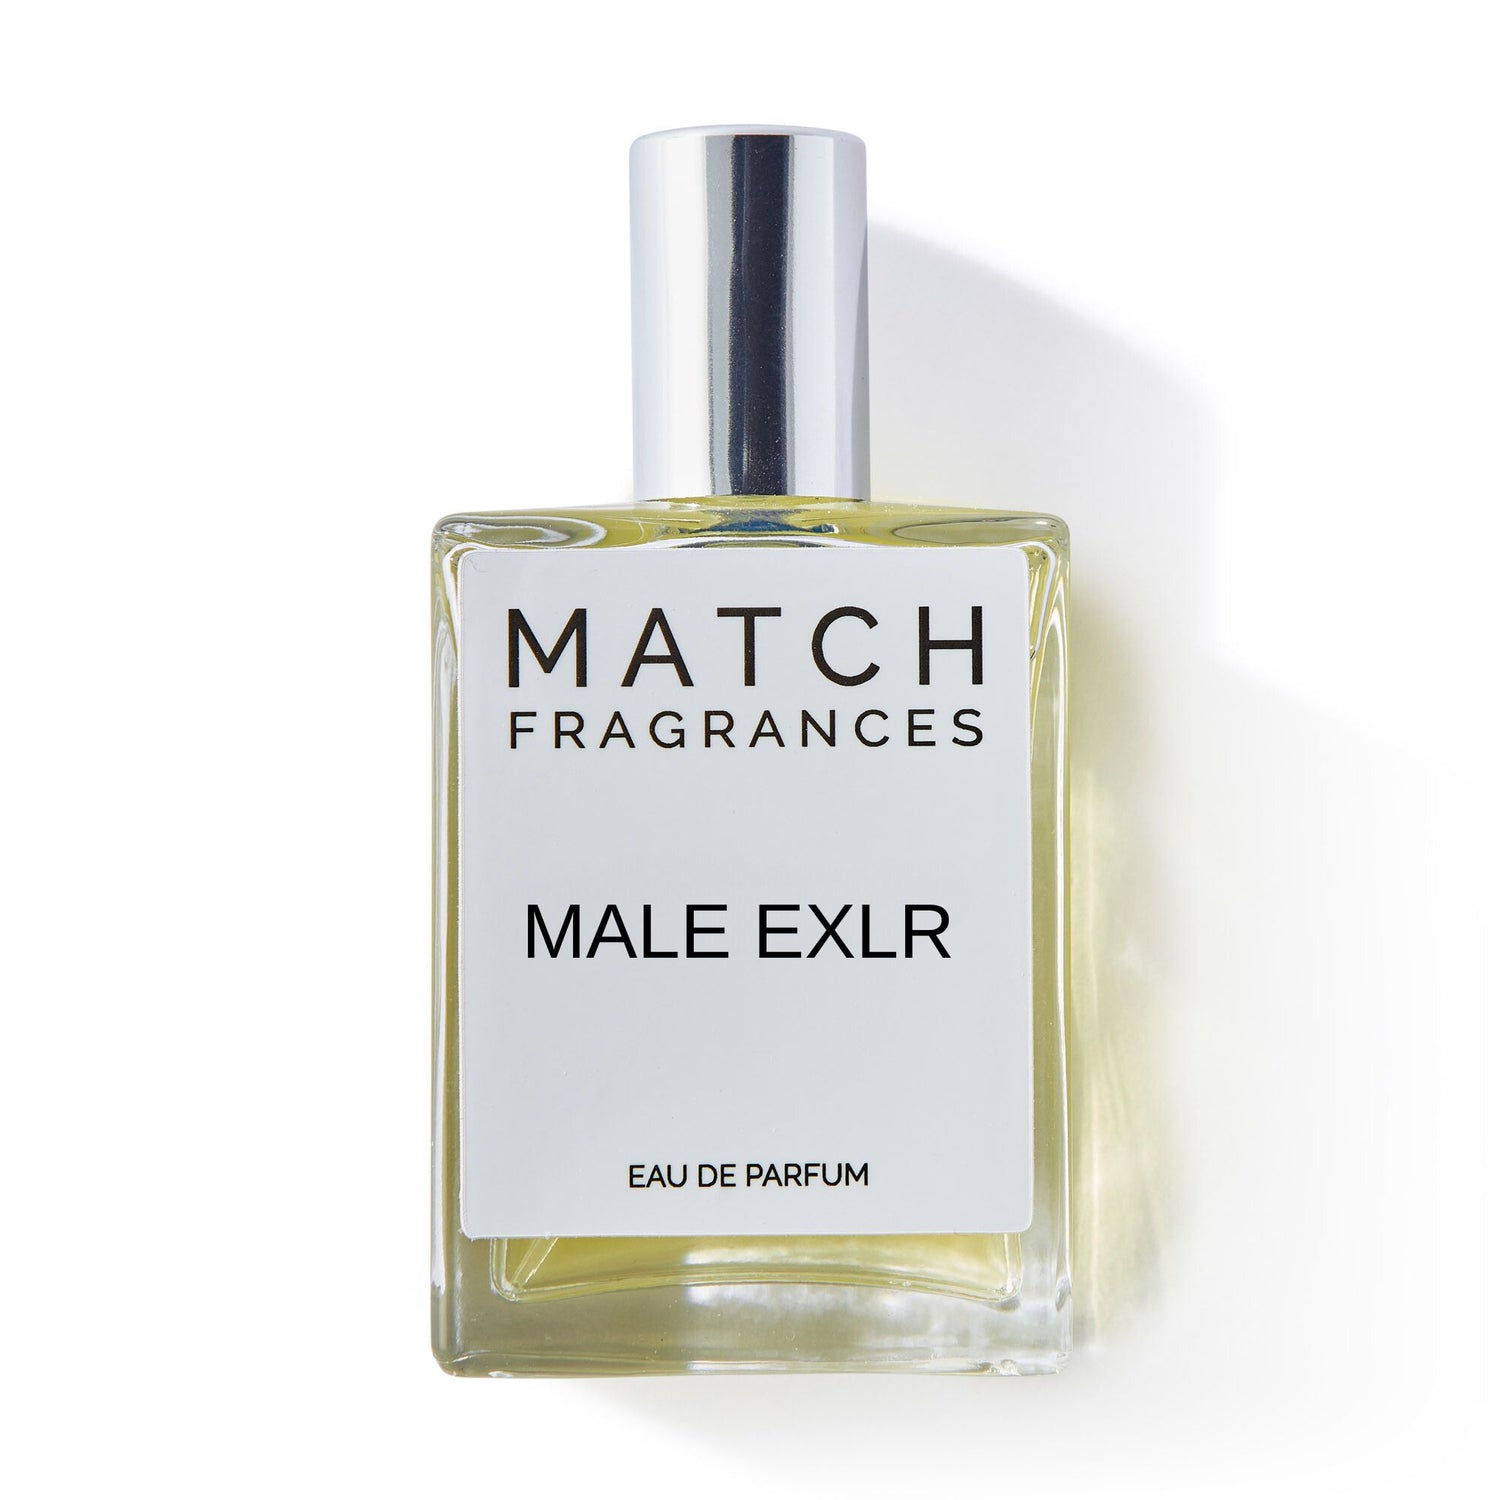 Inspired by Le Male Elixir